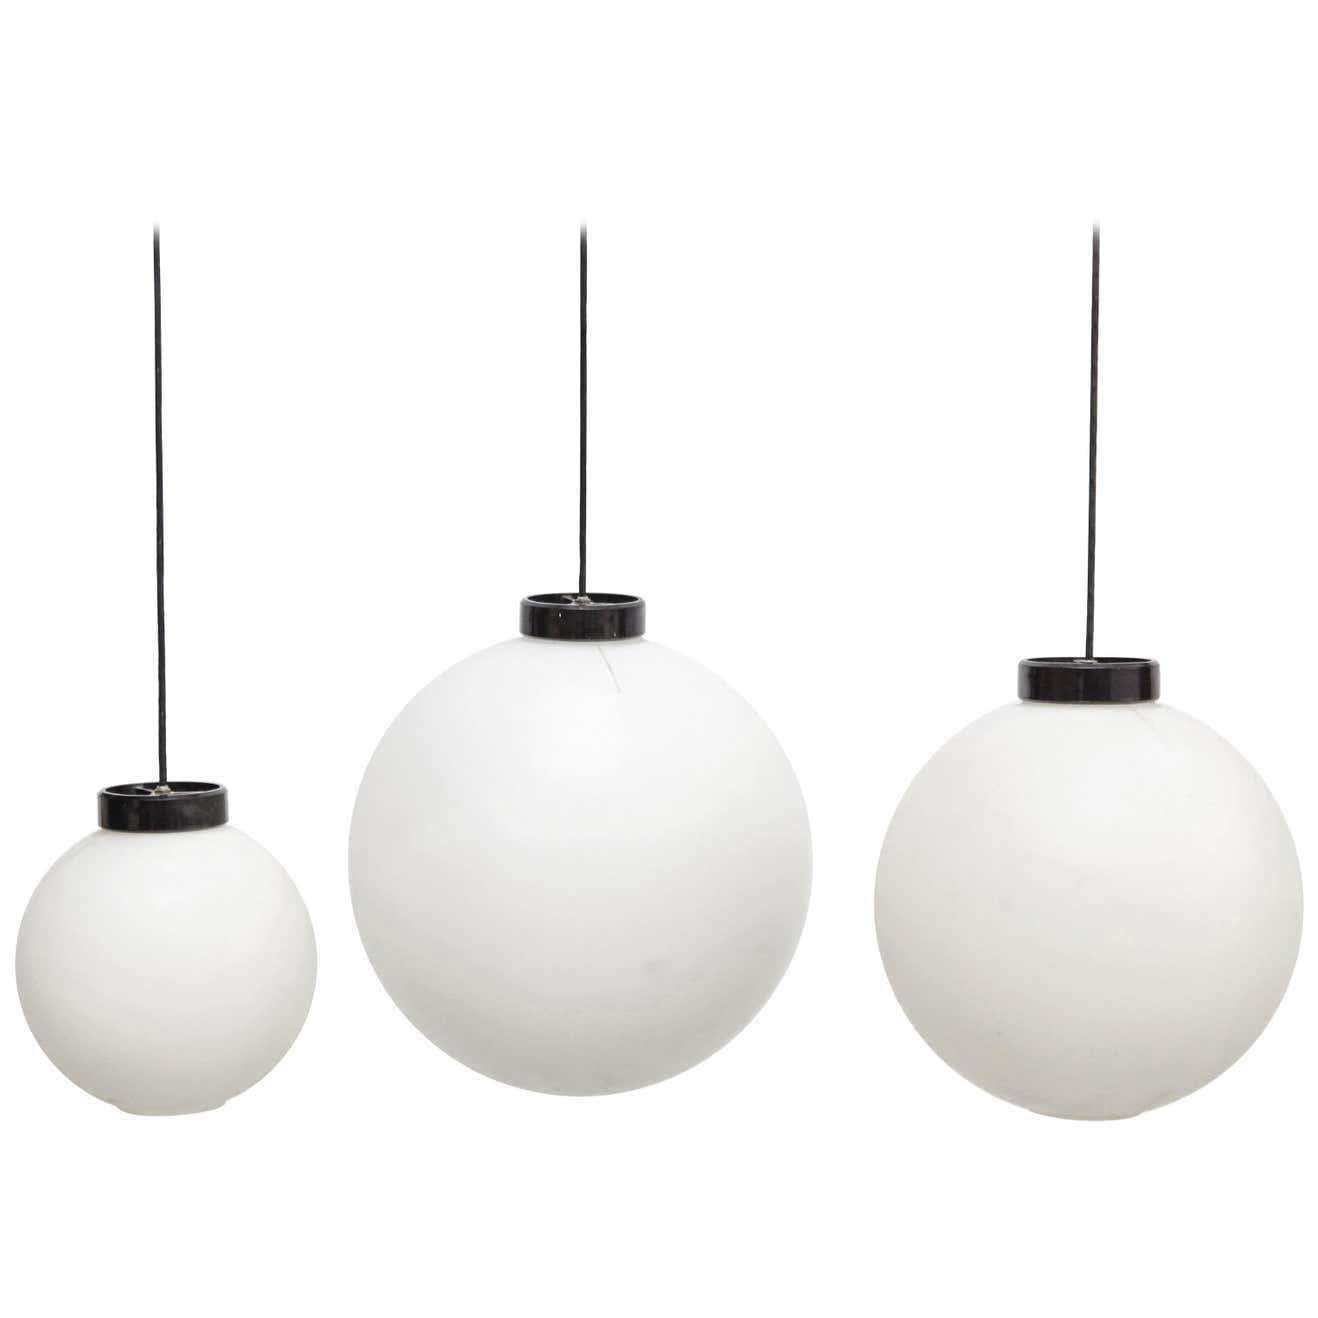 Late 20th Century Set of Three White Pending Lamps by Miguel Mila for Tramo in Plastic, circa 1970 For Sale